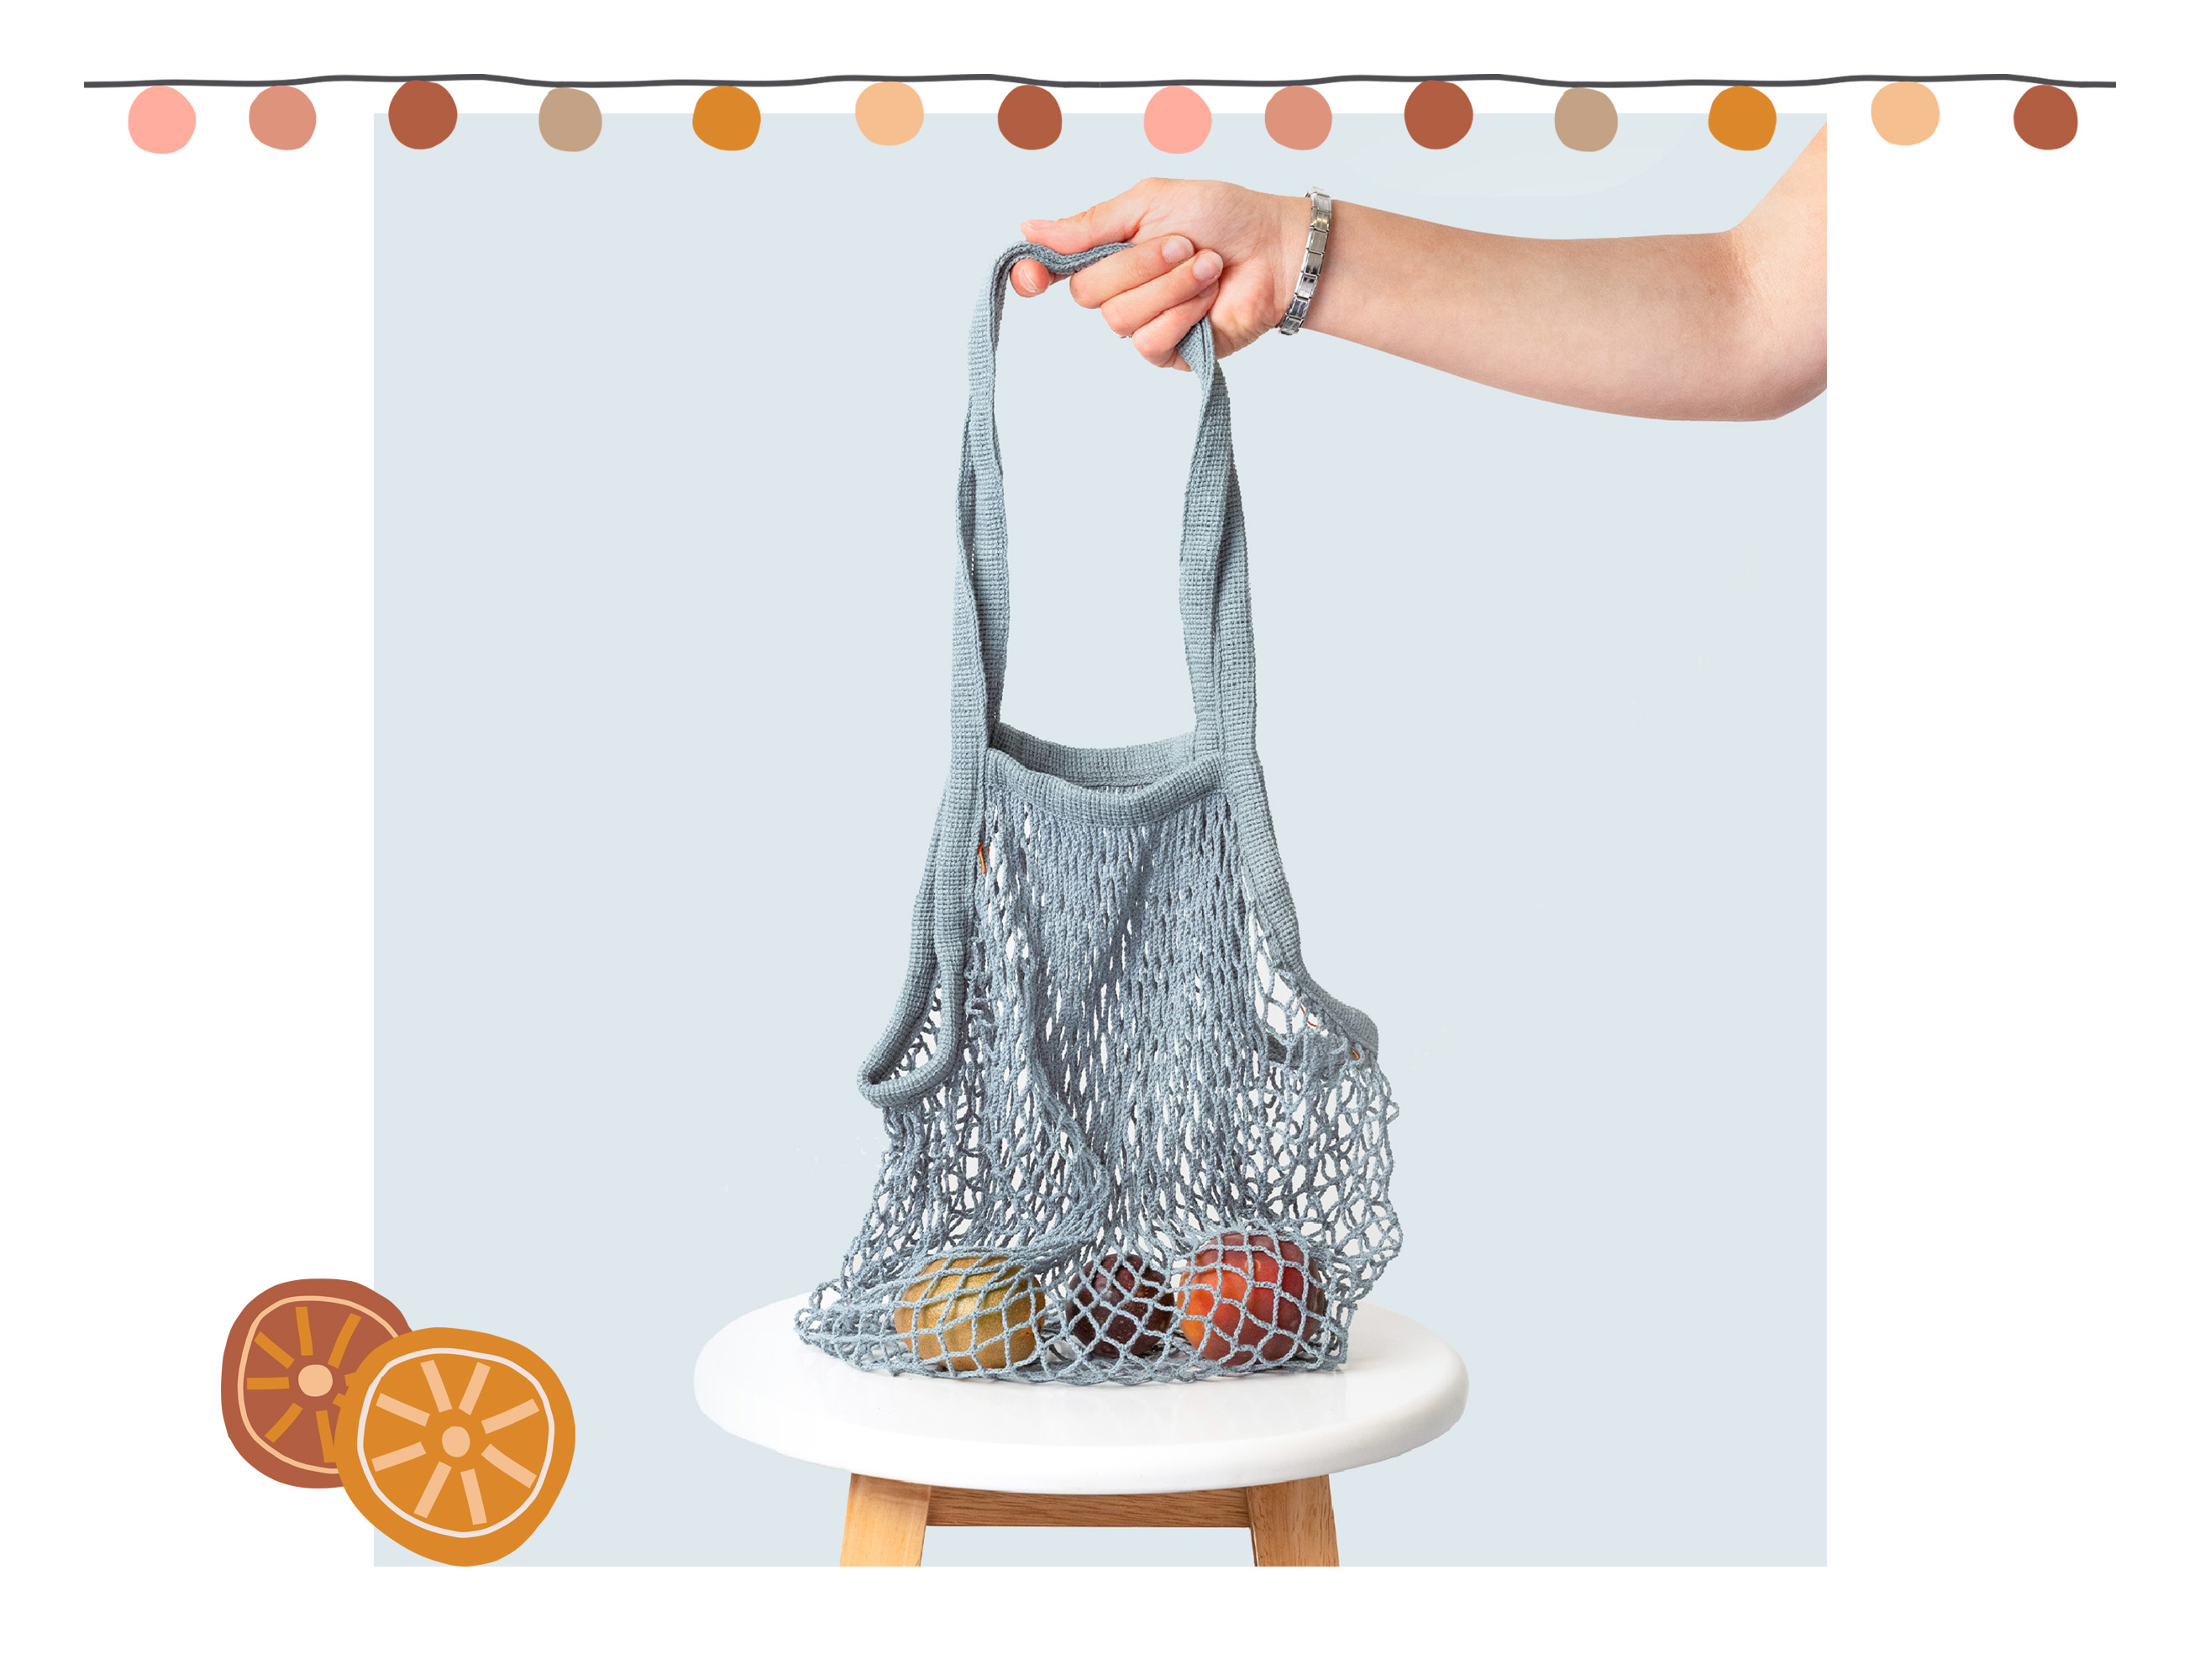 Duck Egg Blue Mesh Cotton Bag with decorative lemons and Christmas lights in oranges, pinks and browns